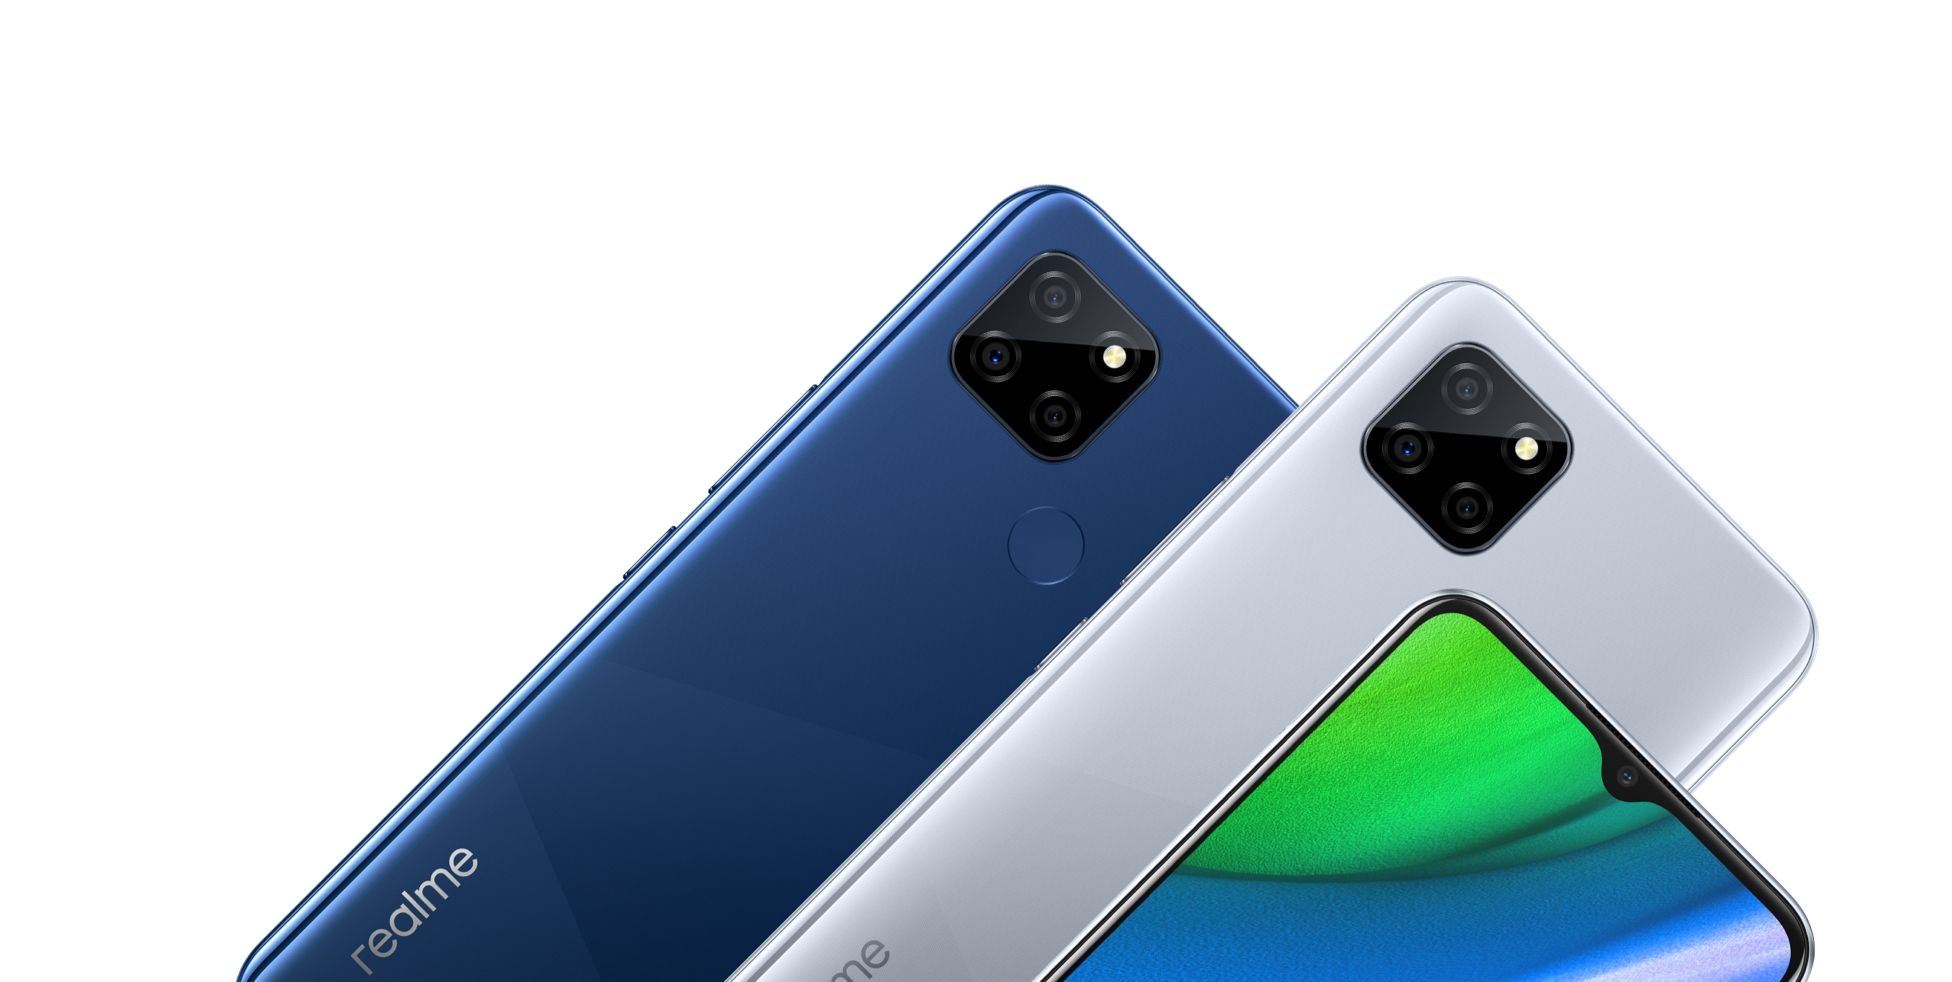 Realme V3 5G with Dimensity 720 debuts as the cheapest 5G phone priced at 999 Yuan (~$146)